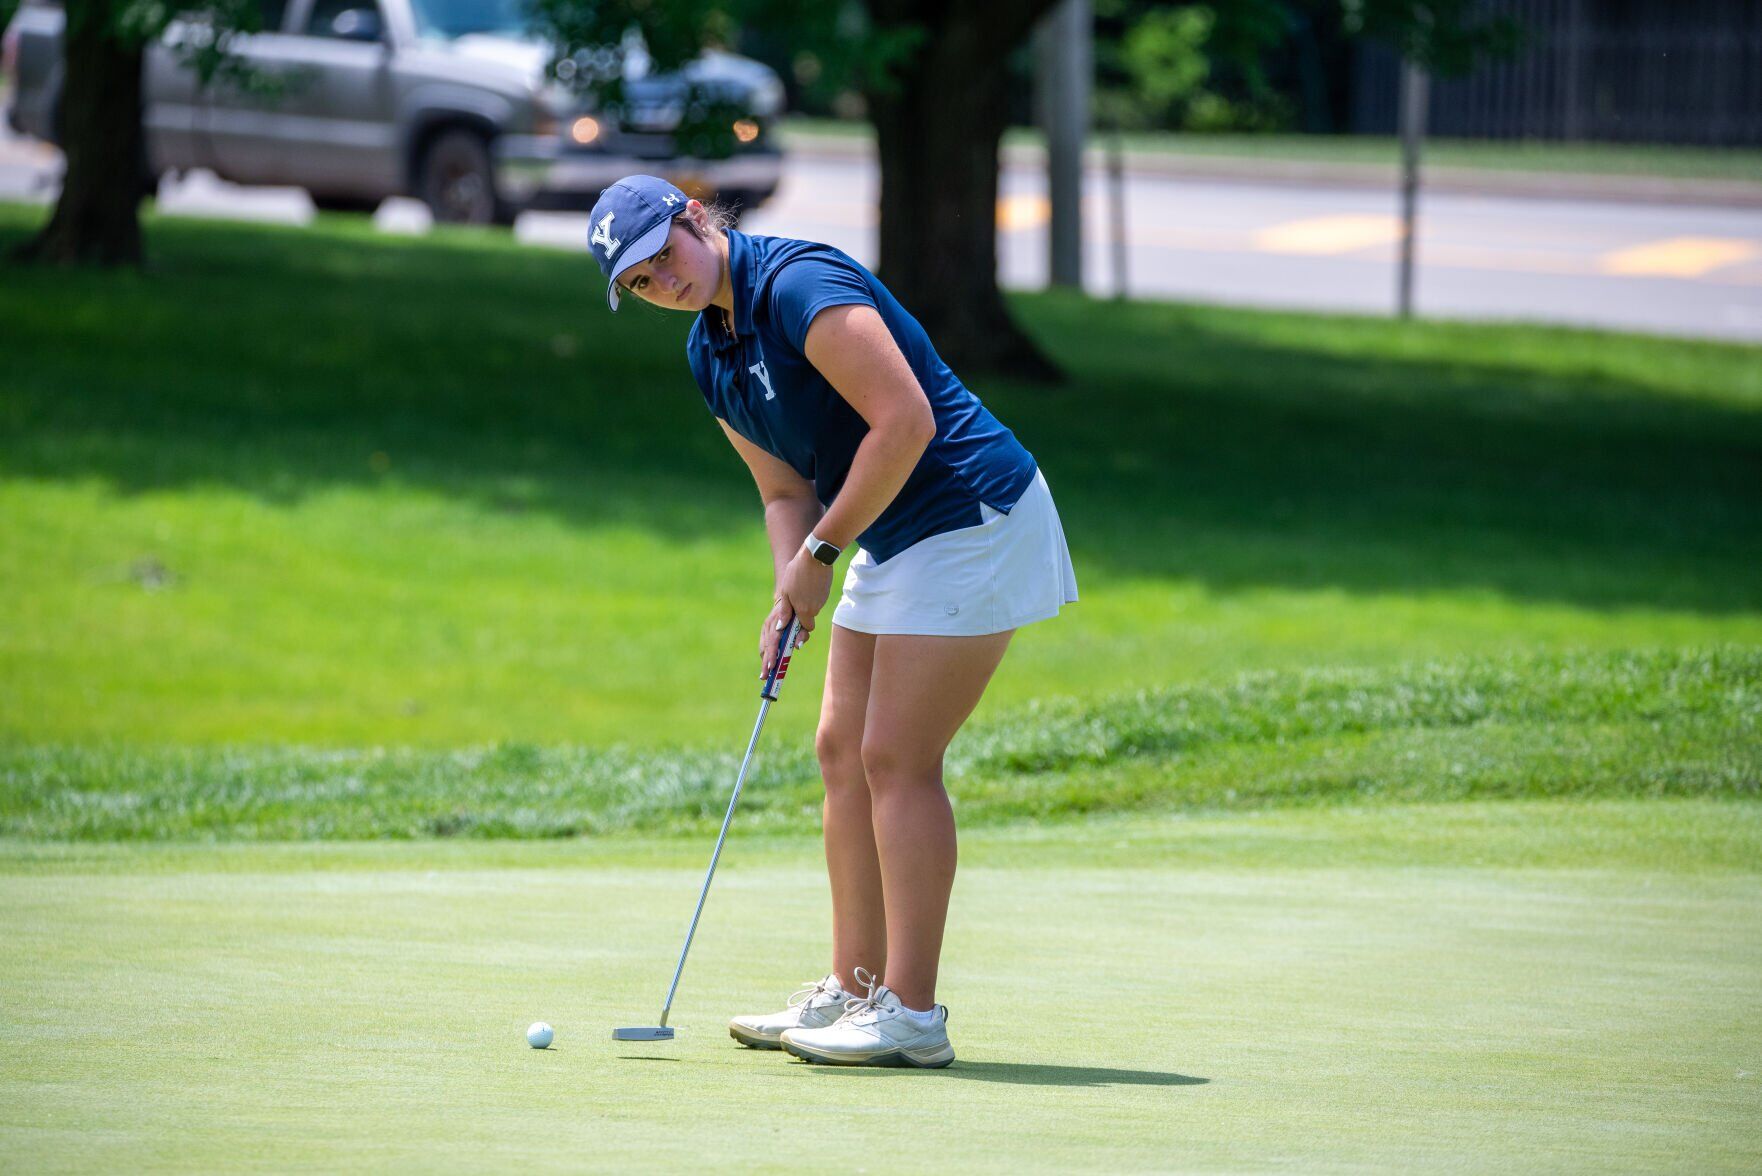 Schedule change leads to greater exposure, bright future for amateur female golfers at Porter Cup Sports lockportjournal